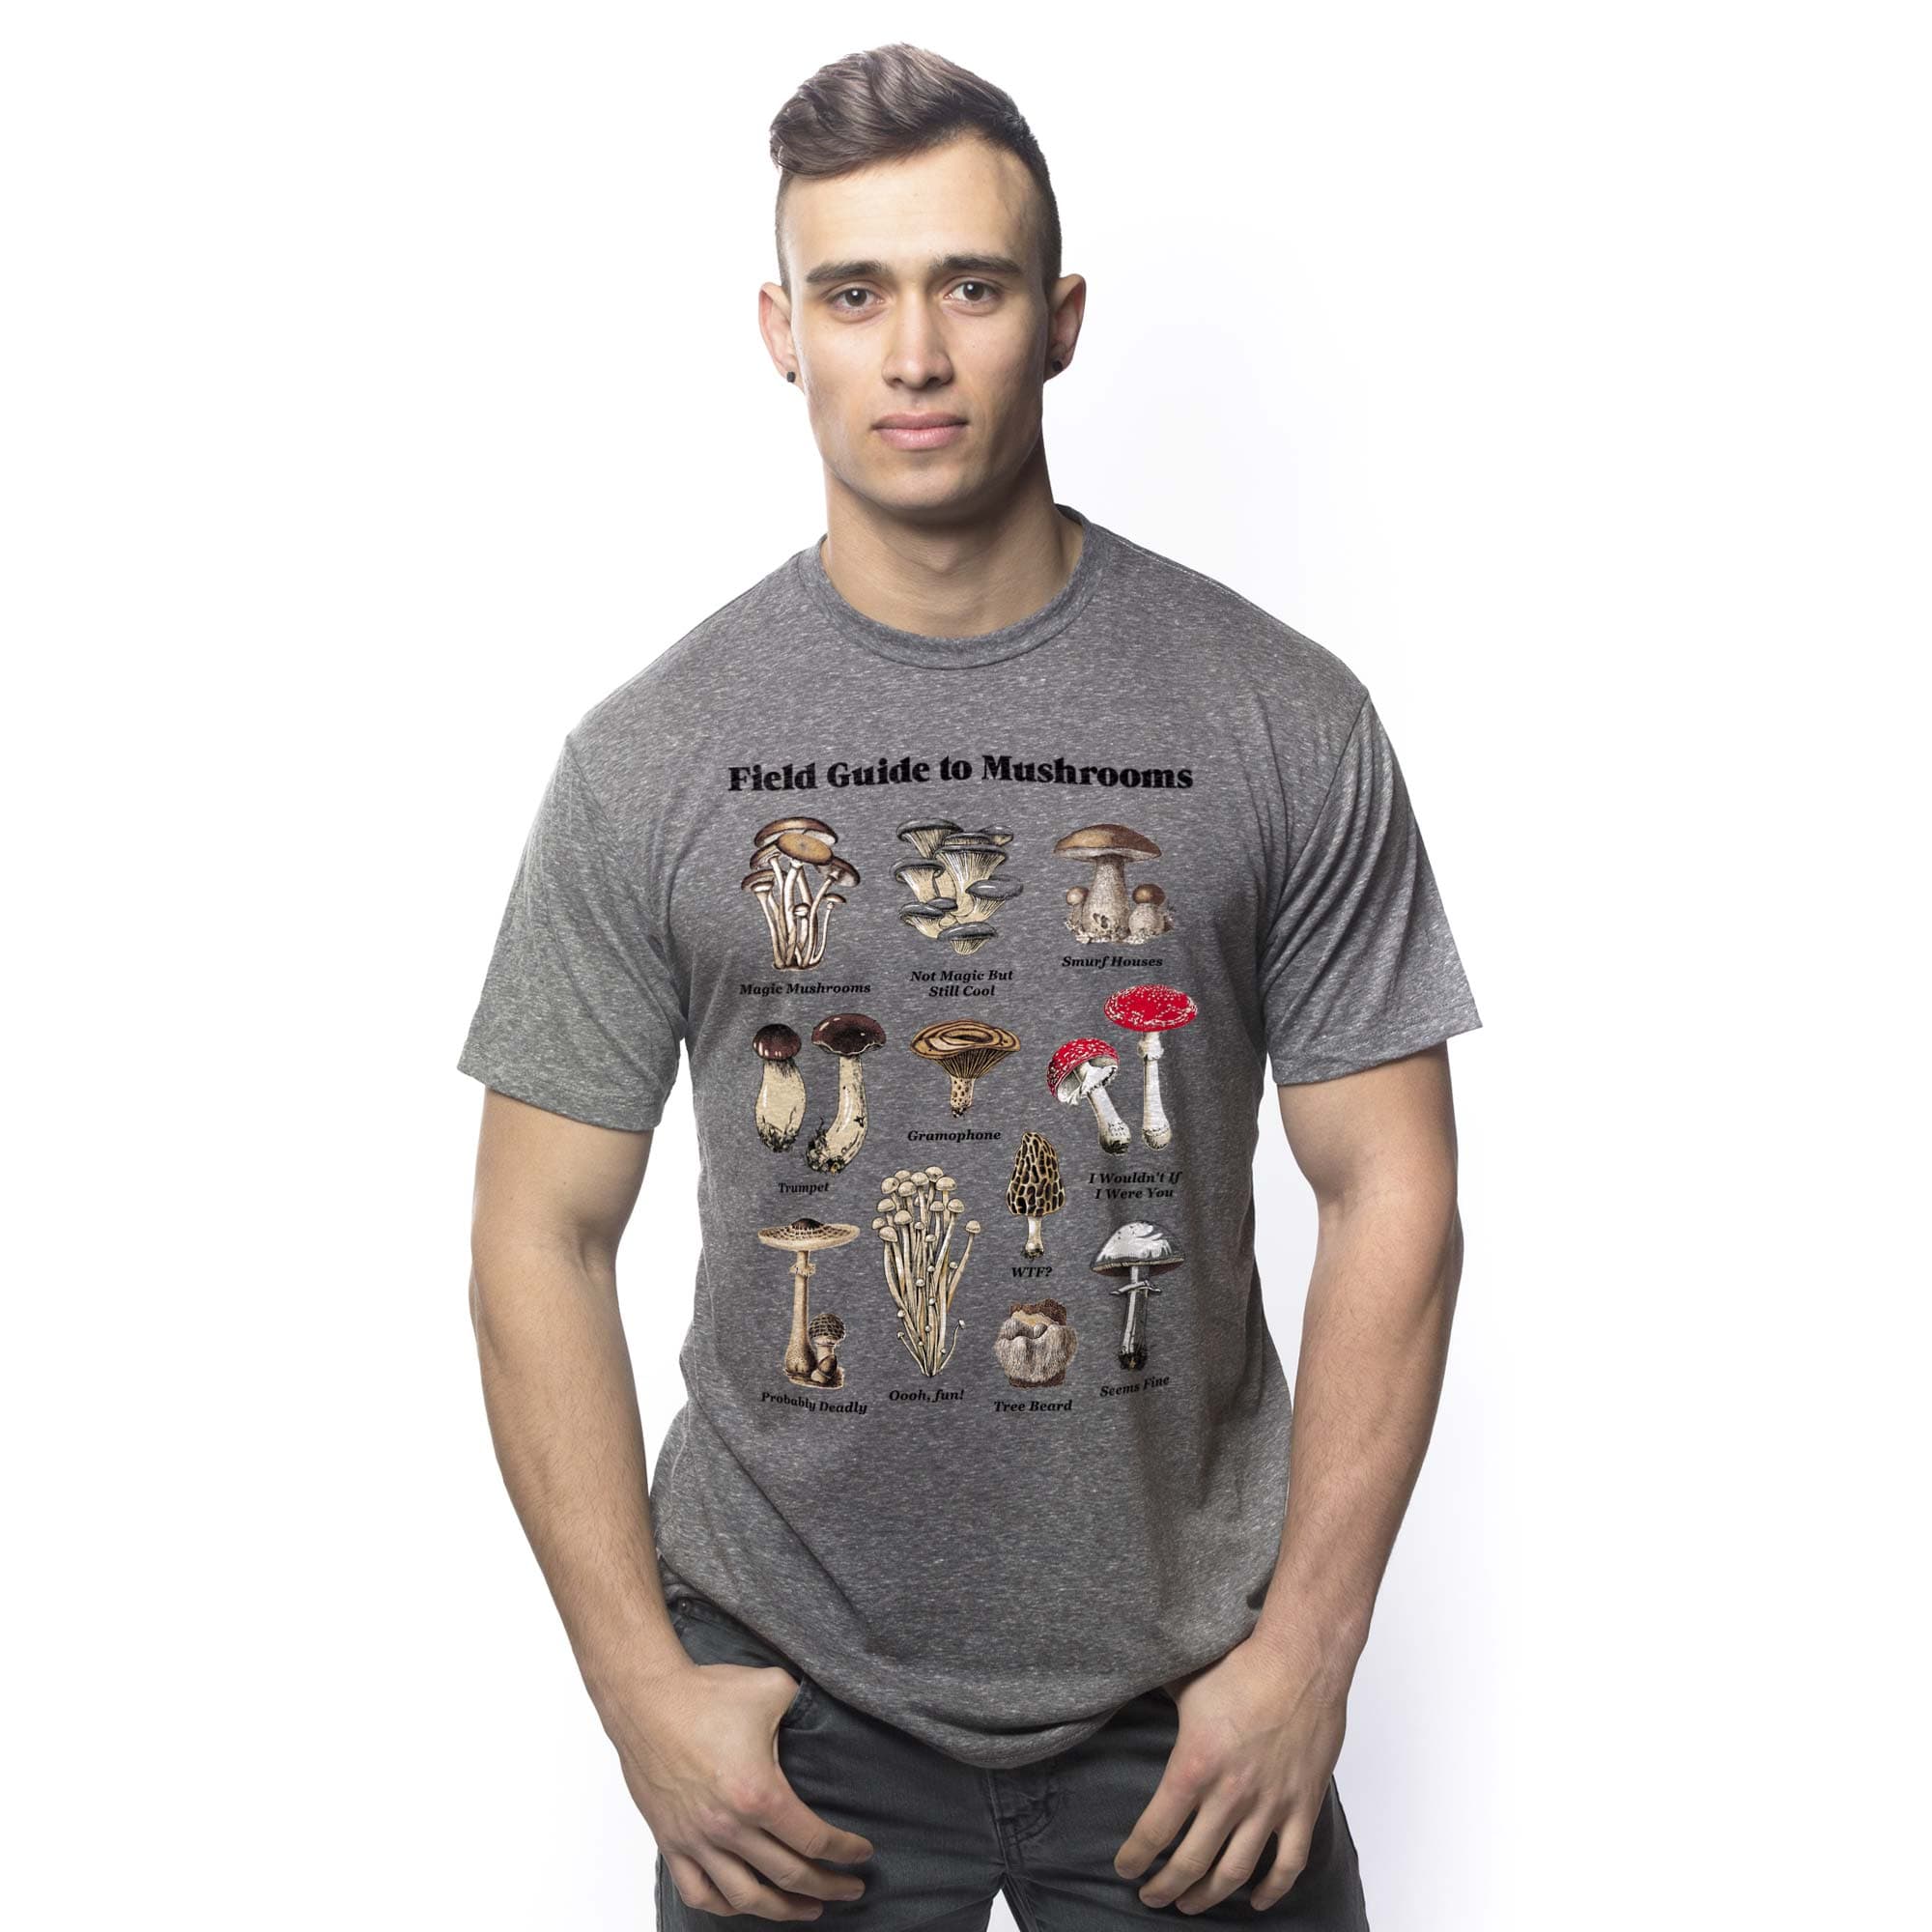 Men's Guide To Mushrooms Vintage Graphic T-Shirt | Cool Science Chart Tee On Model | Solid Threads